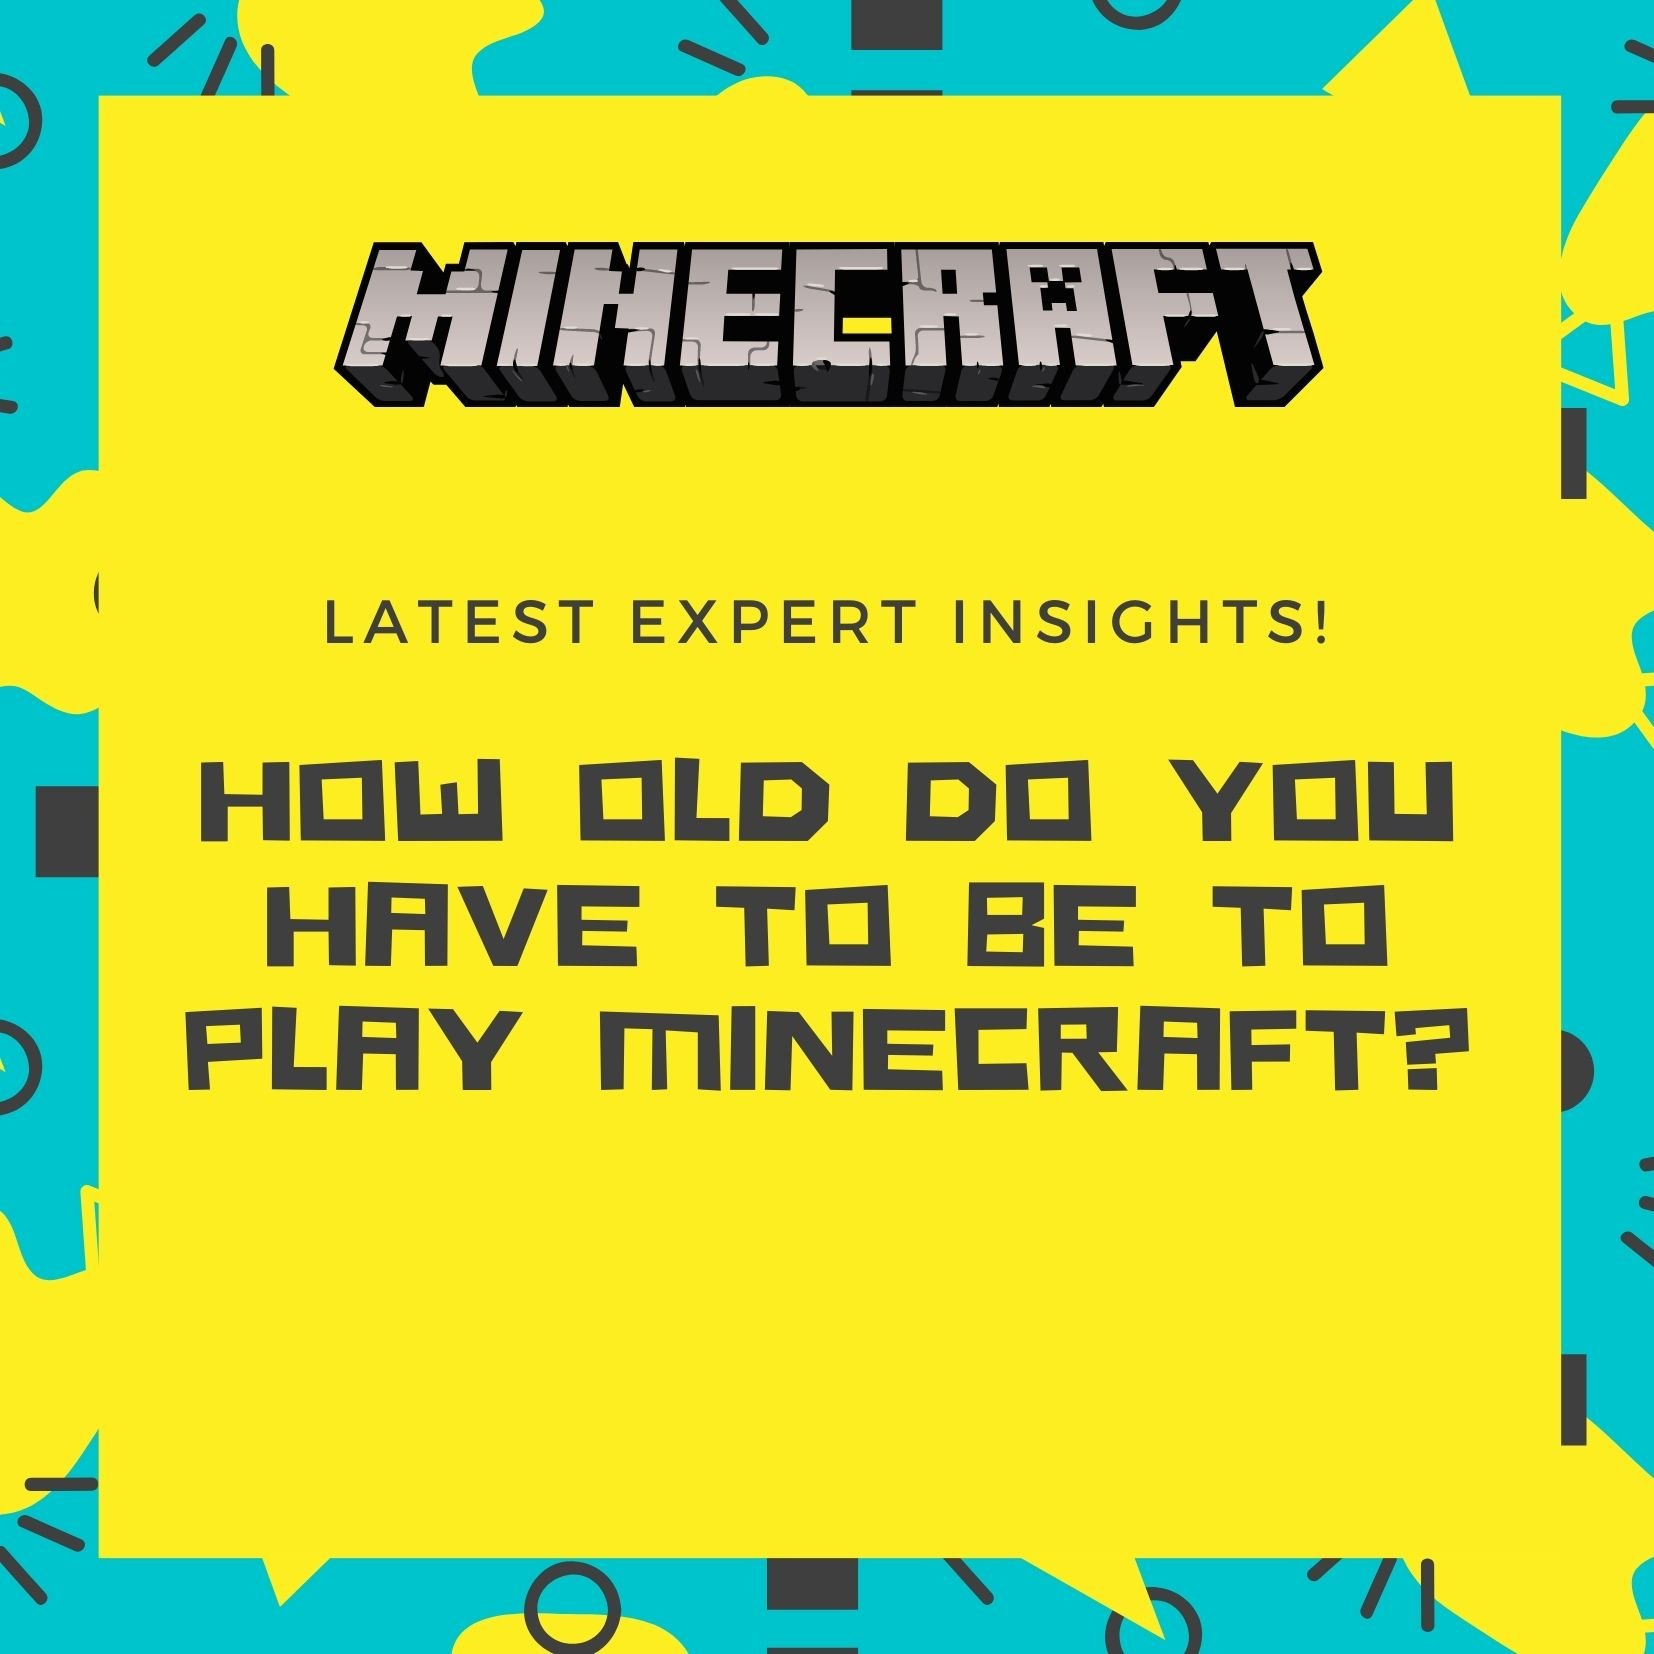 How Old Do You Have To Be To Play Minecraft?